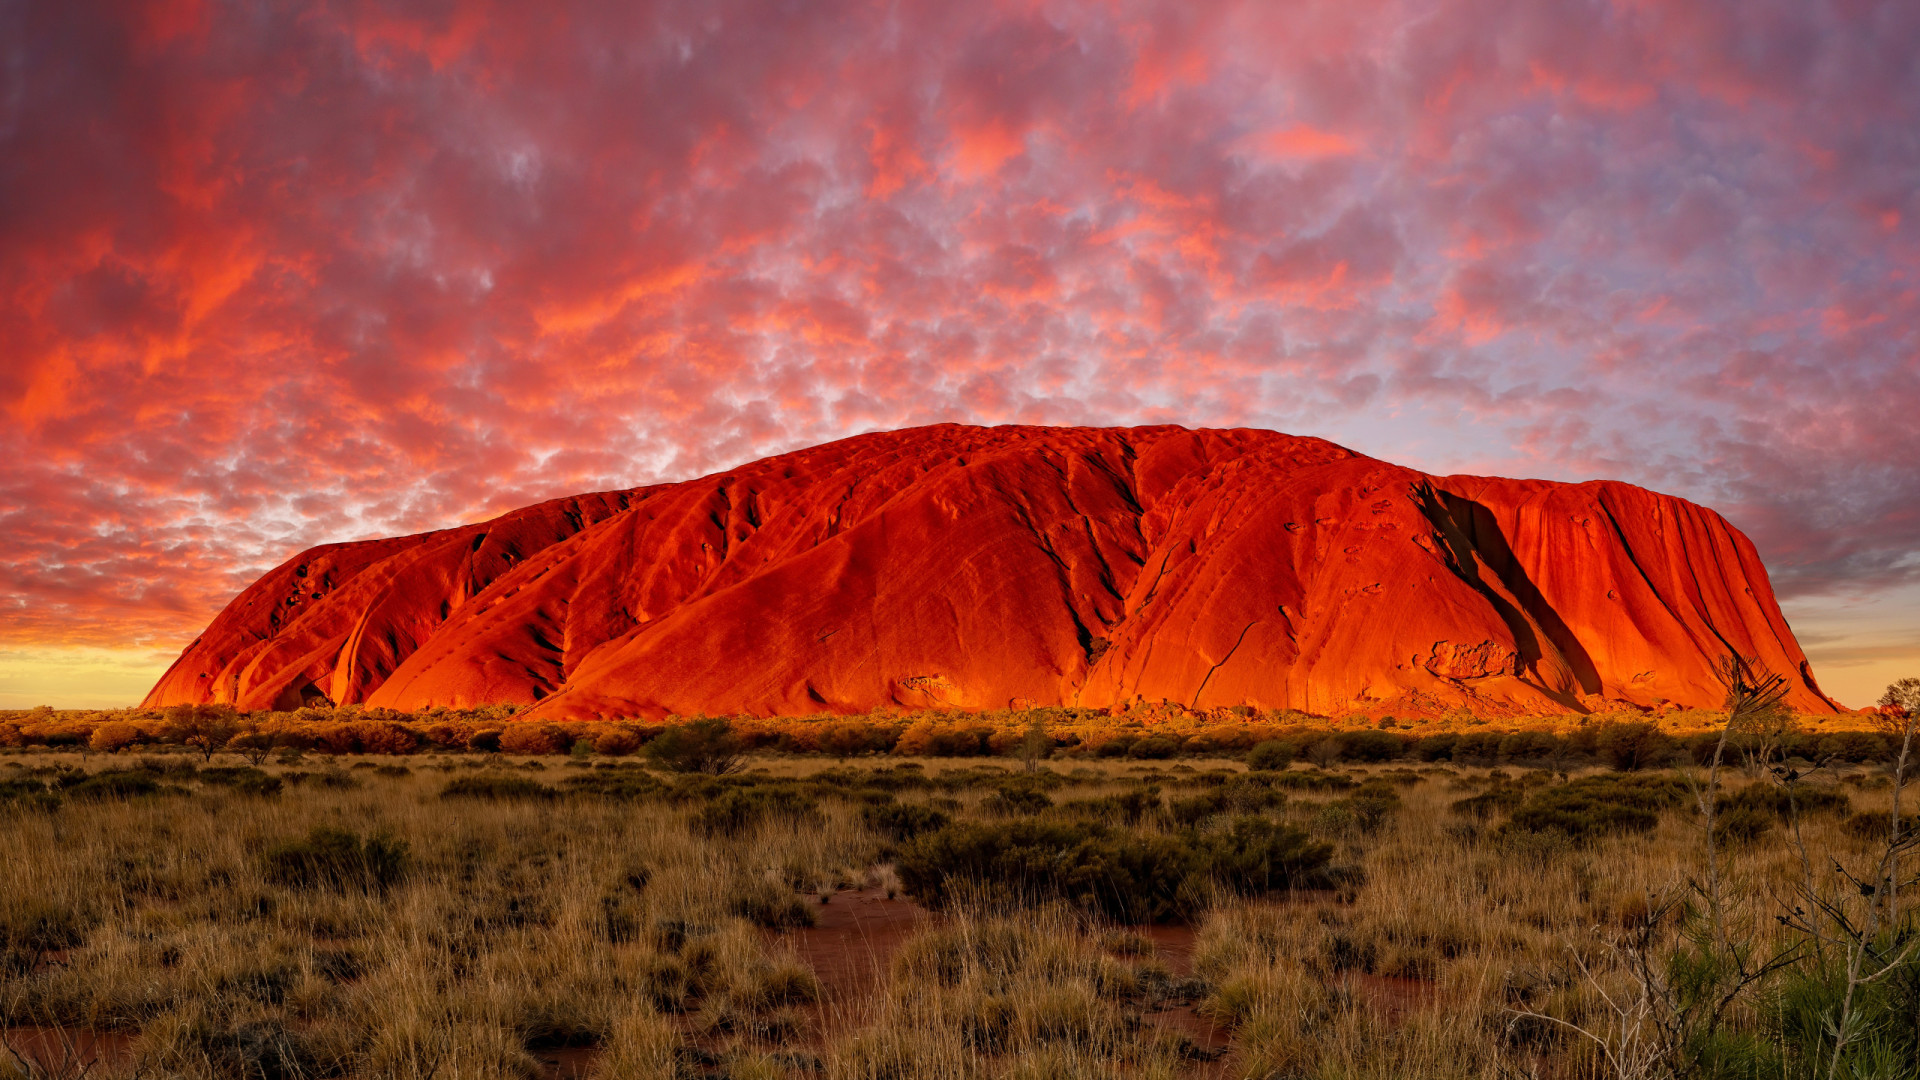 <p>Respecting indigenous culture and environmental concerns, access to Uluru is being restricted. This decision honors the Anangu people's request, acknowledging Uluru's cultural significance and the need to preserve its natural state.</p><p>You may also like:<a href="https://www.starsinsider.com/n/448669?utm_source=msn.com&utm_medium=display&utm_campaign=referral_description&utm_content=646906en-us"> Celebrities who are members of the National Rifle Association</a></p>